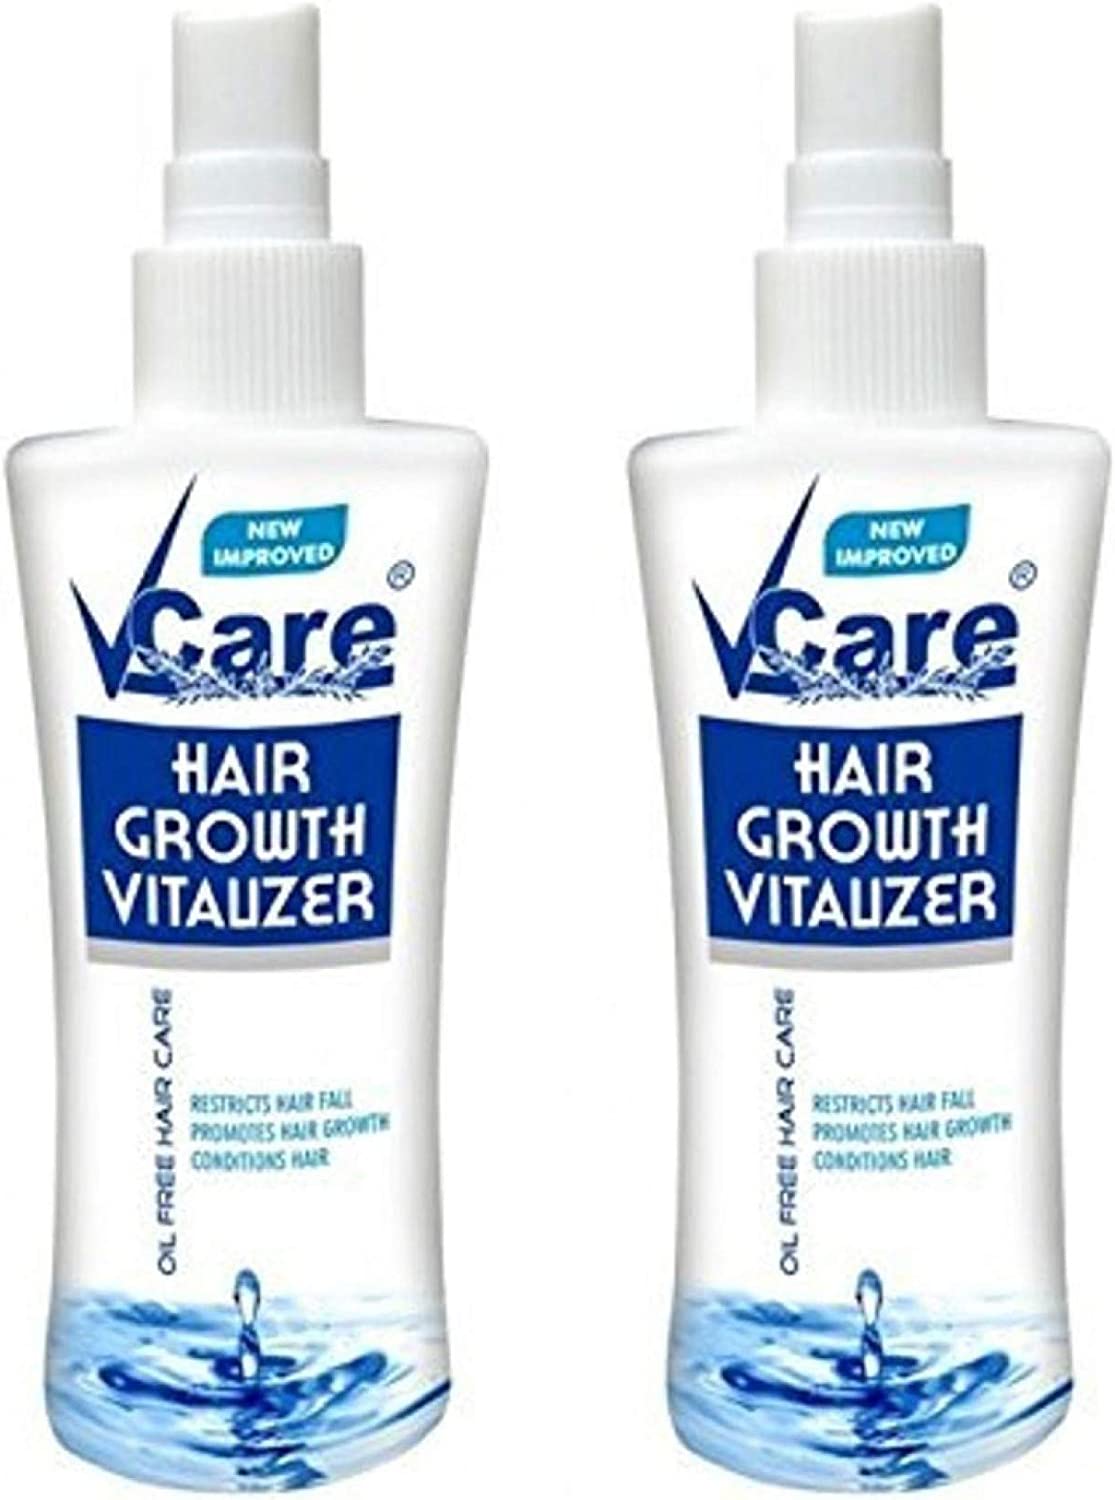 VCare Hair Growth Vitalizer review   MUST WATCH   YouTube